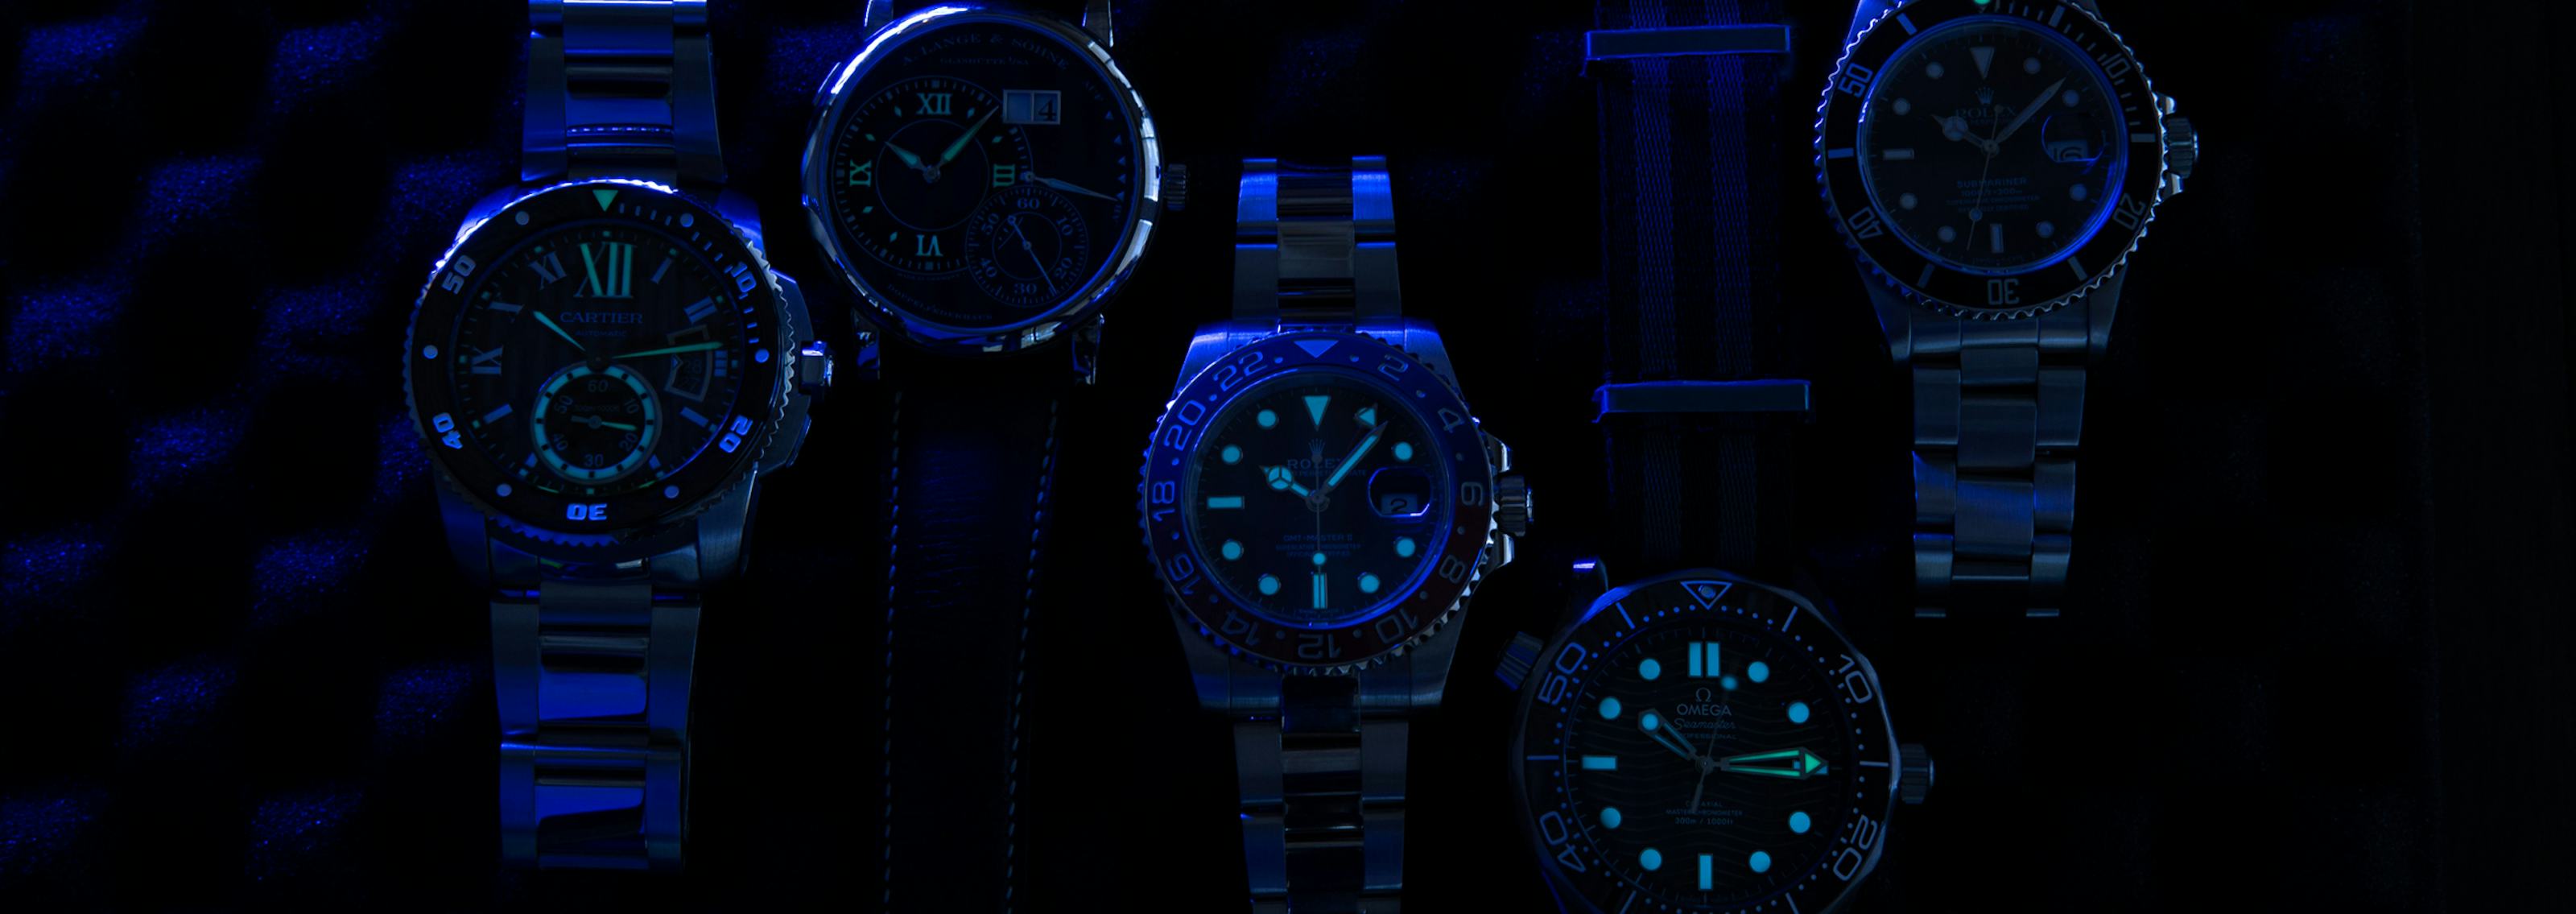 Tales of Lume Watches: Where it all Began